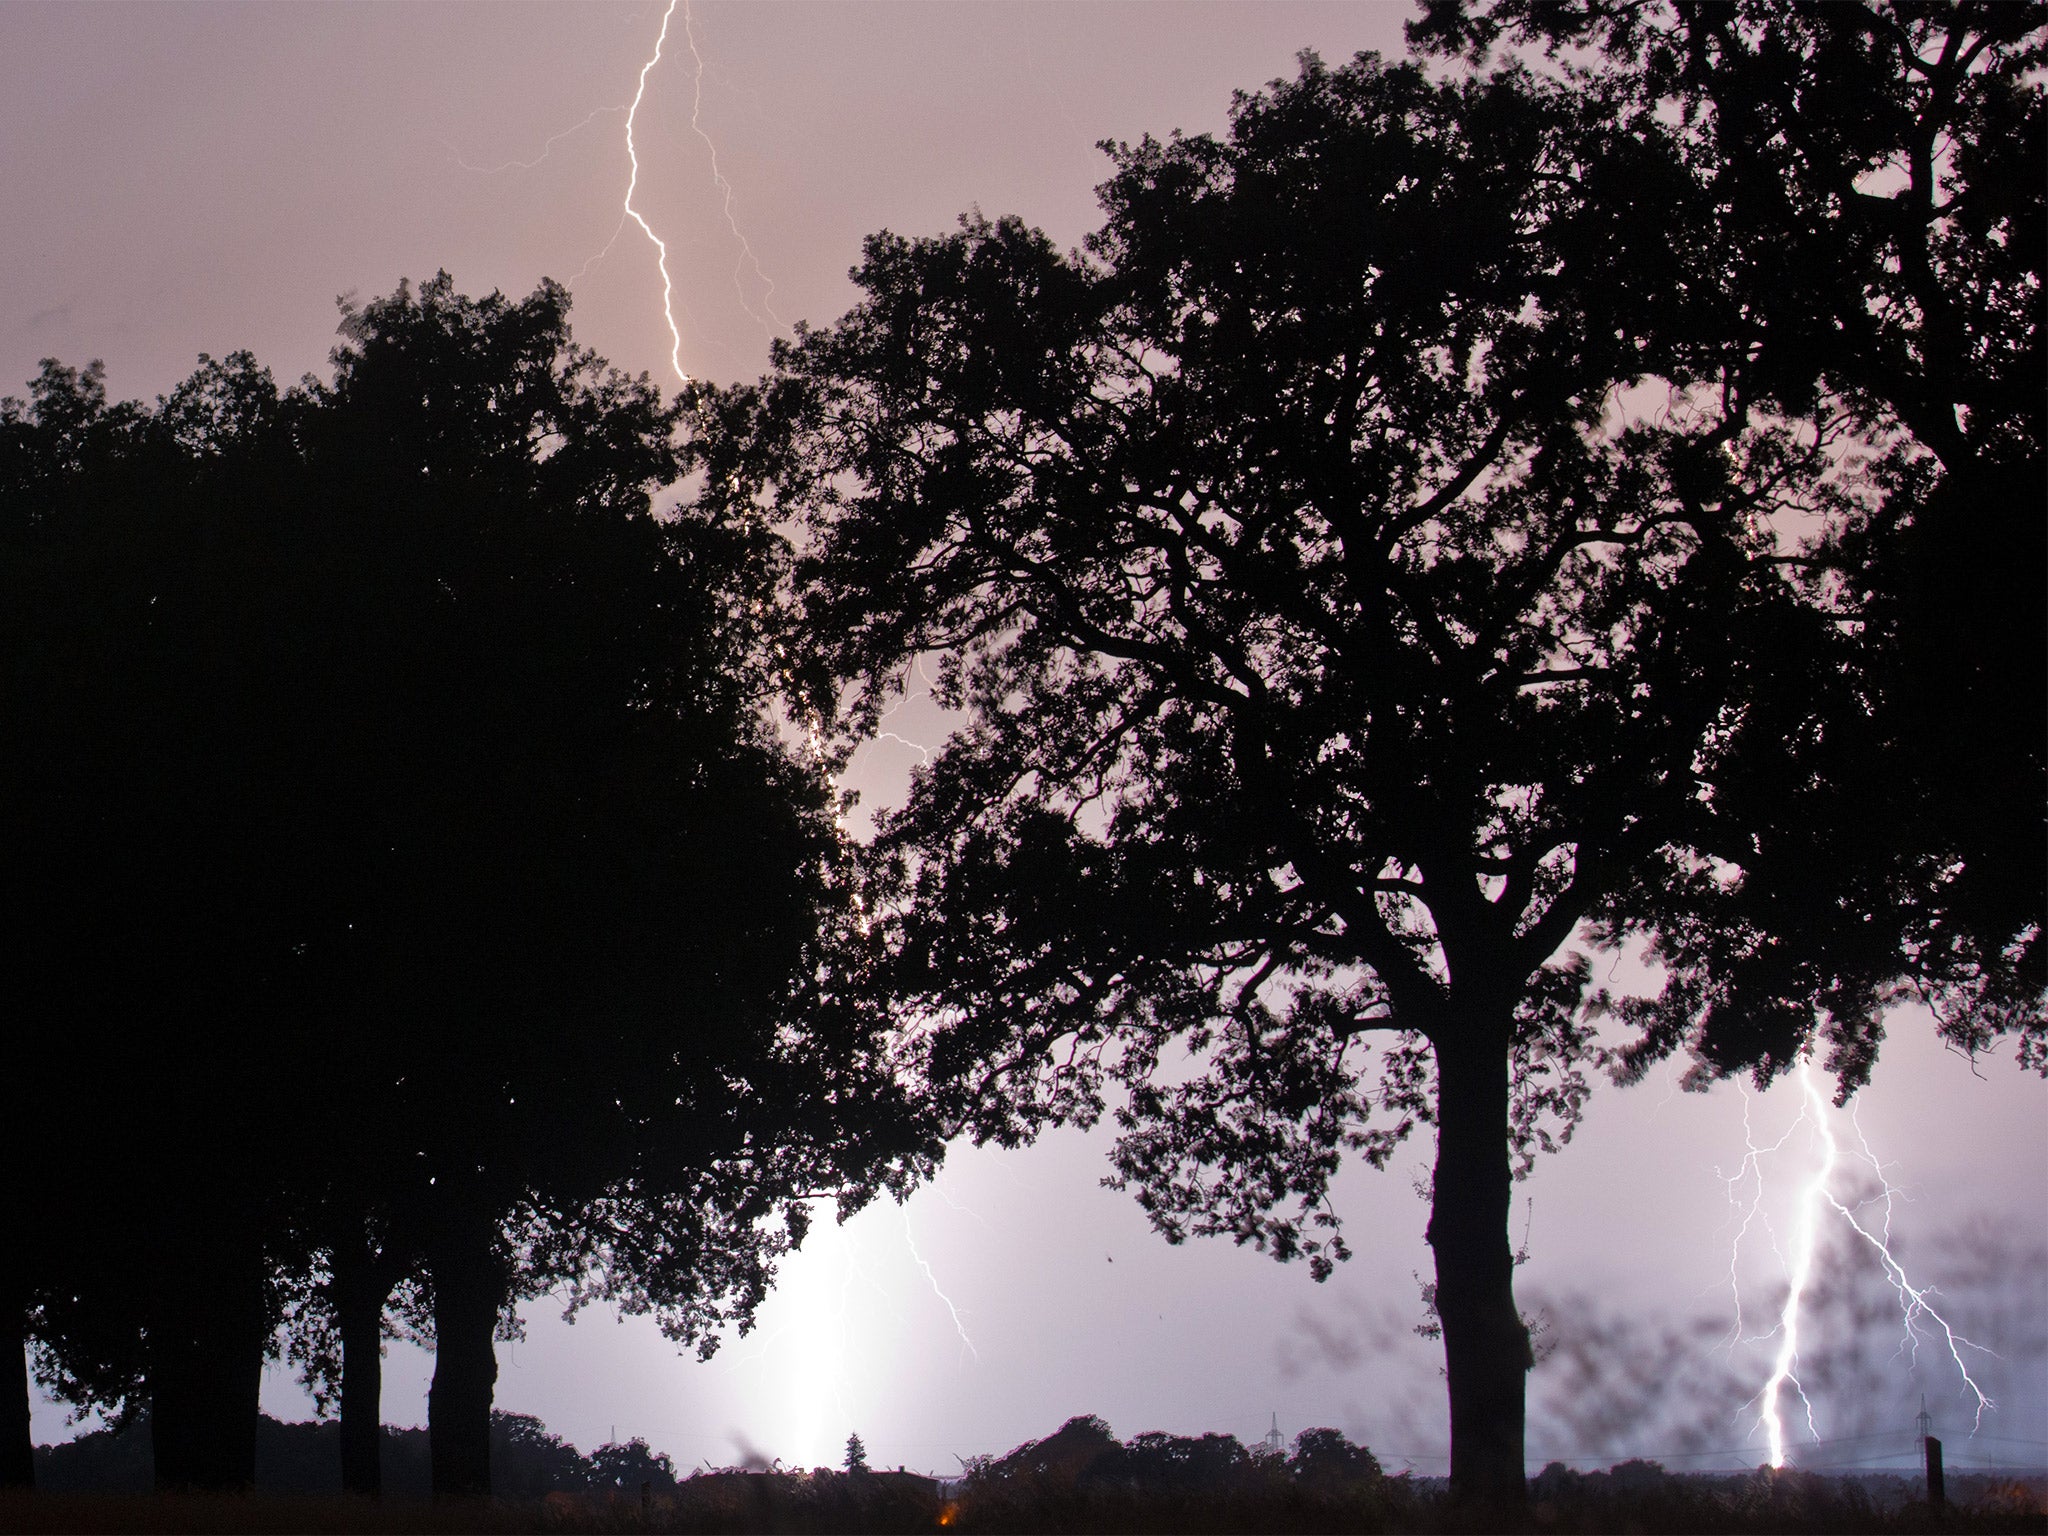 On strikes: being hit by lightning can stop a person’s heart, render them blind and deaf and scramble their mental faculties (PATRICK PLEUL/AFP/Getty Images)